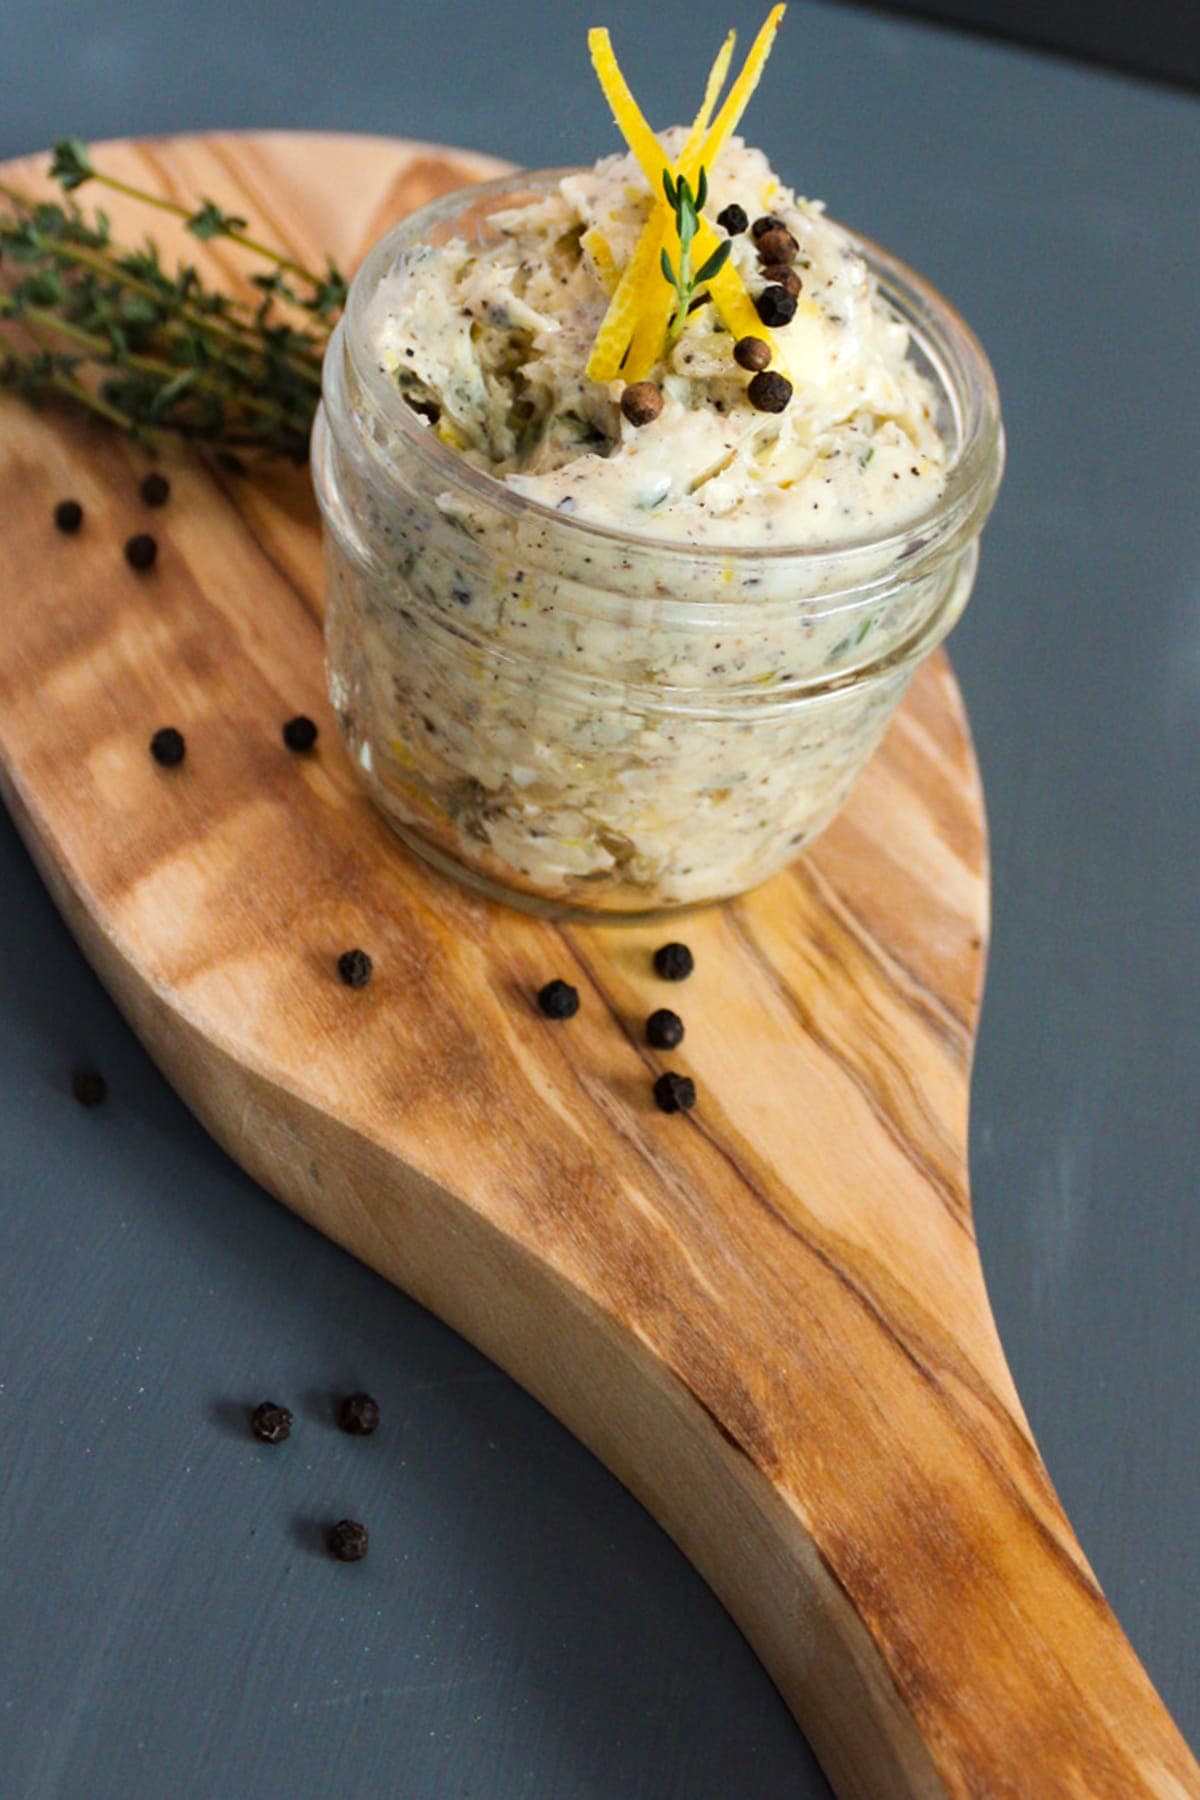 Garlic butter in a jar on a wooden board, garnished with Thyme and lemon zest